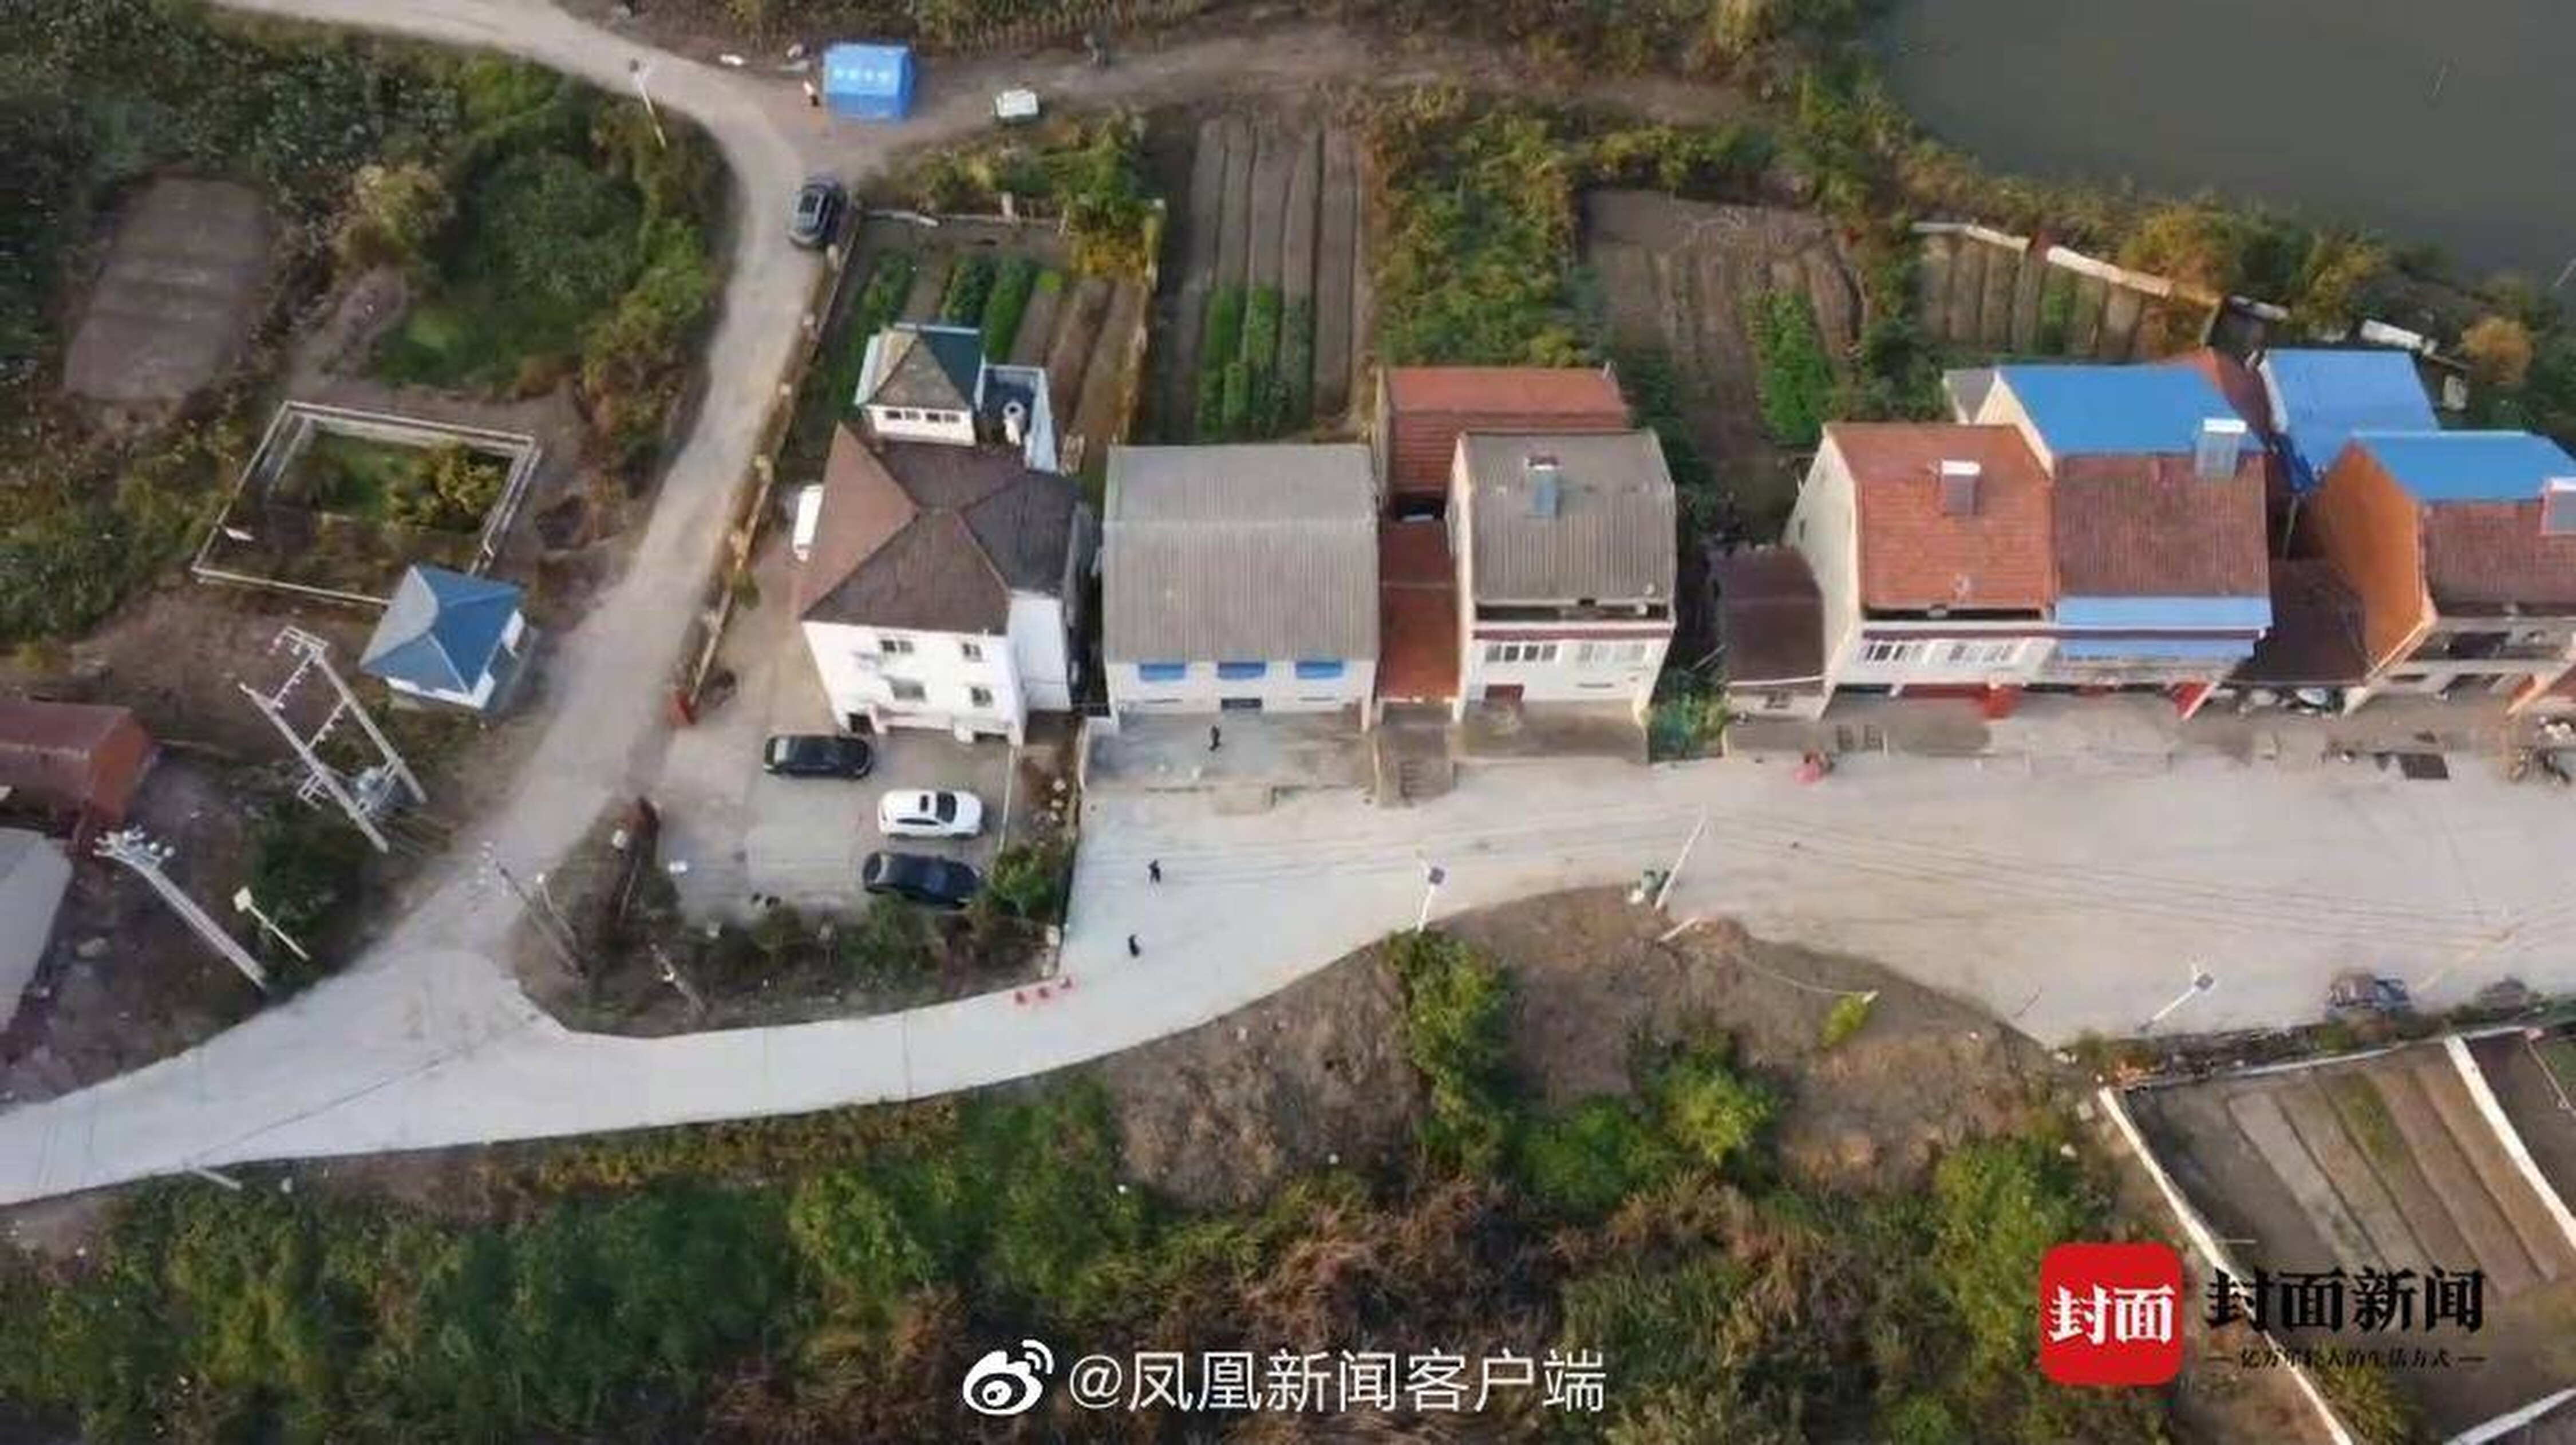 Police are searching for the murderer of a local official in Wuhan in central China, who was killed at home along with four family members. It is alleged a further two victims were killed after the suspected murderer left the home. Photo: Weibo